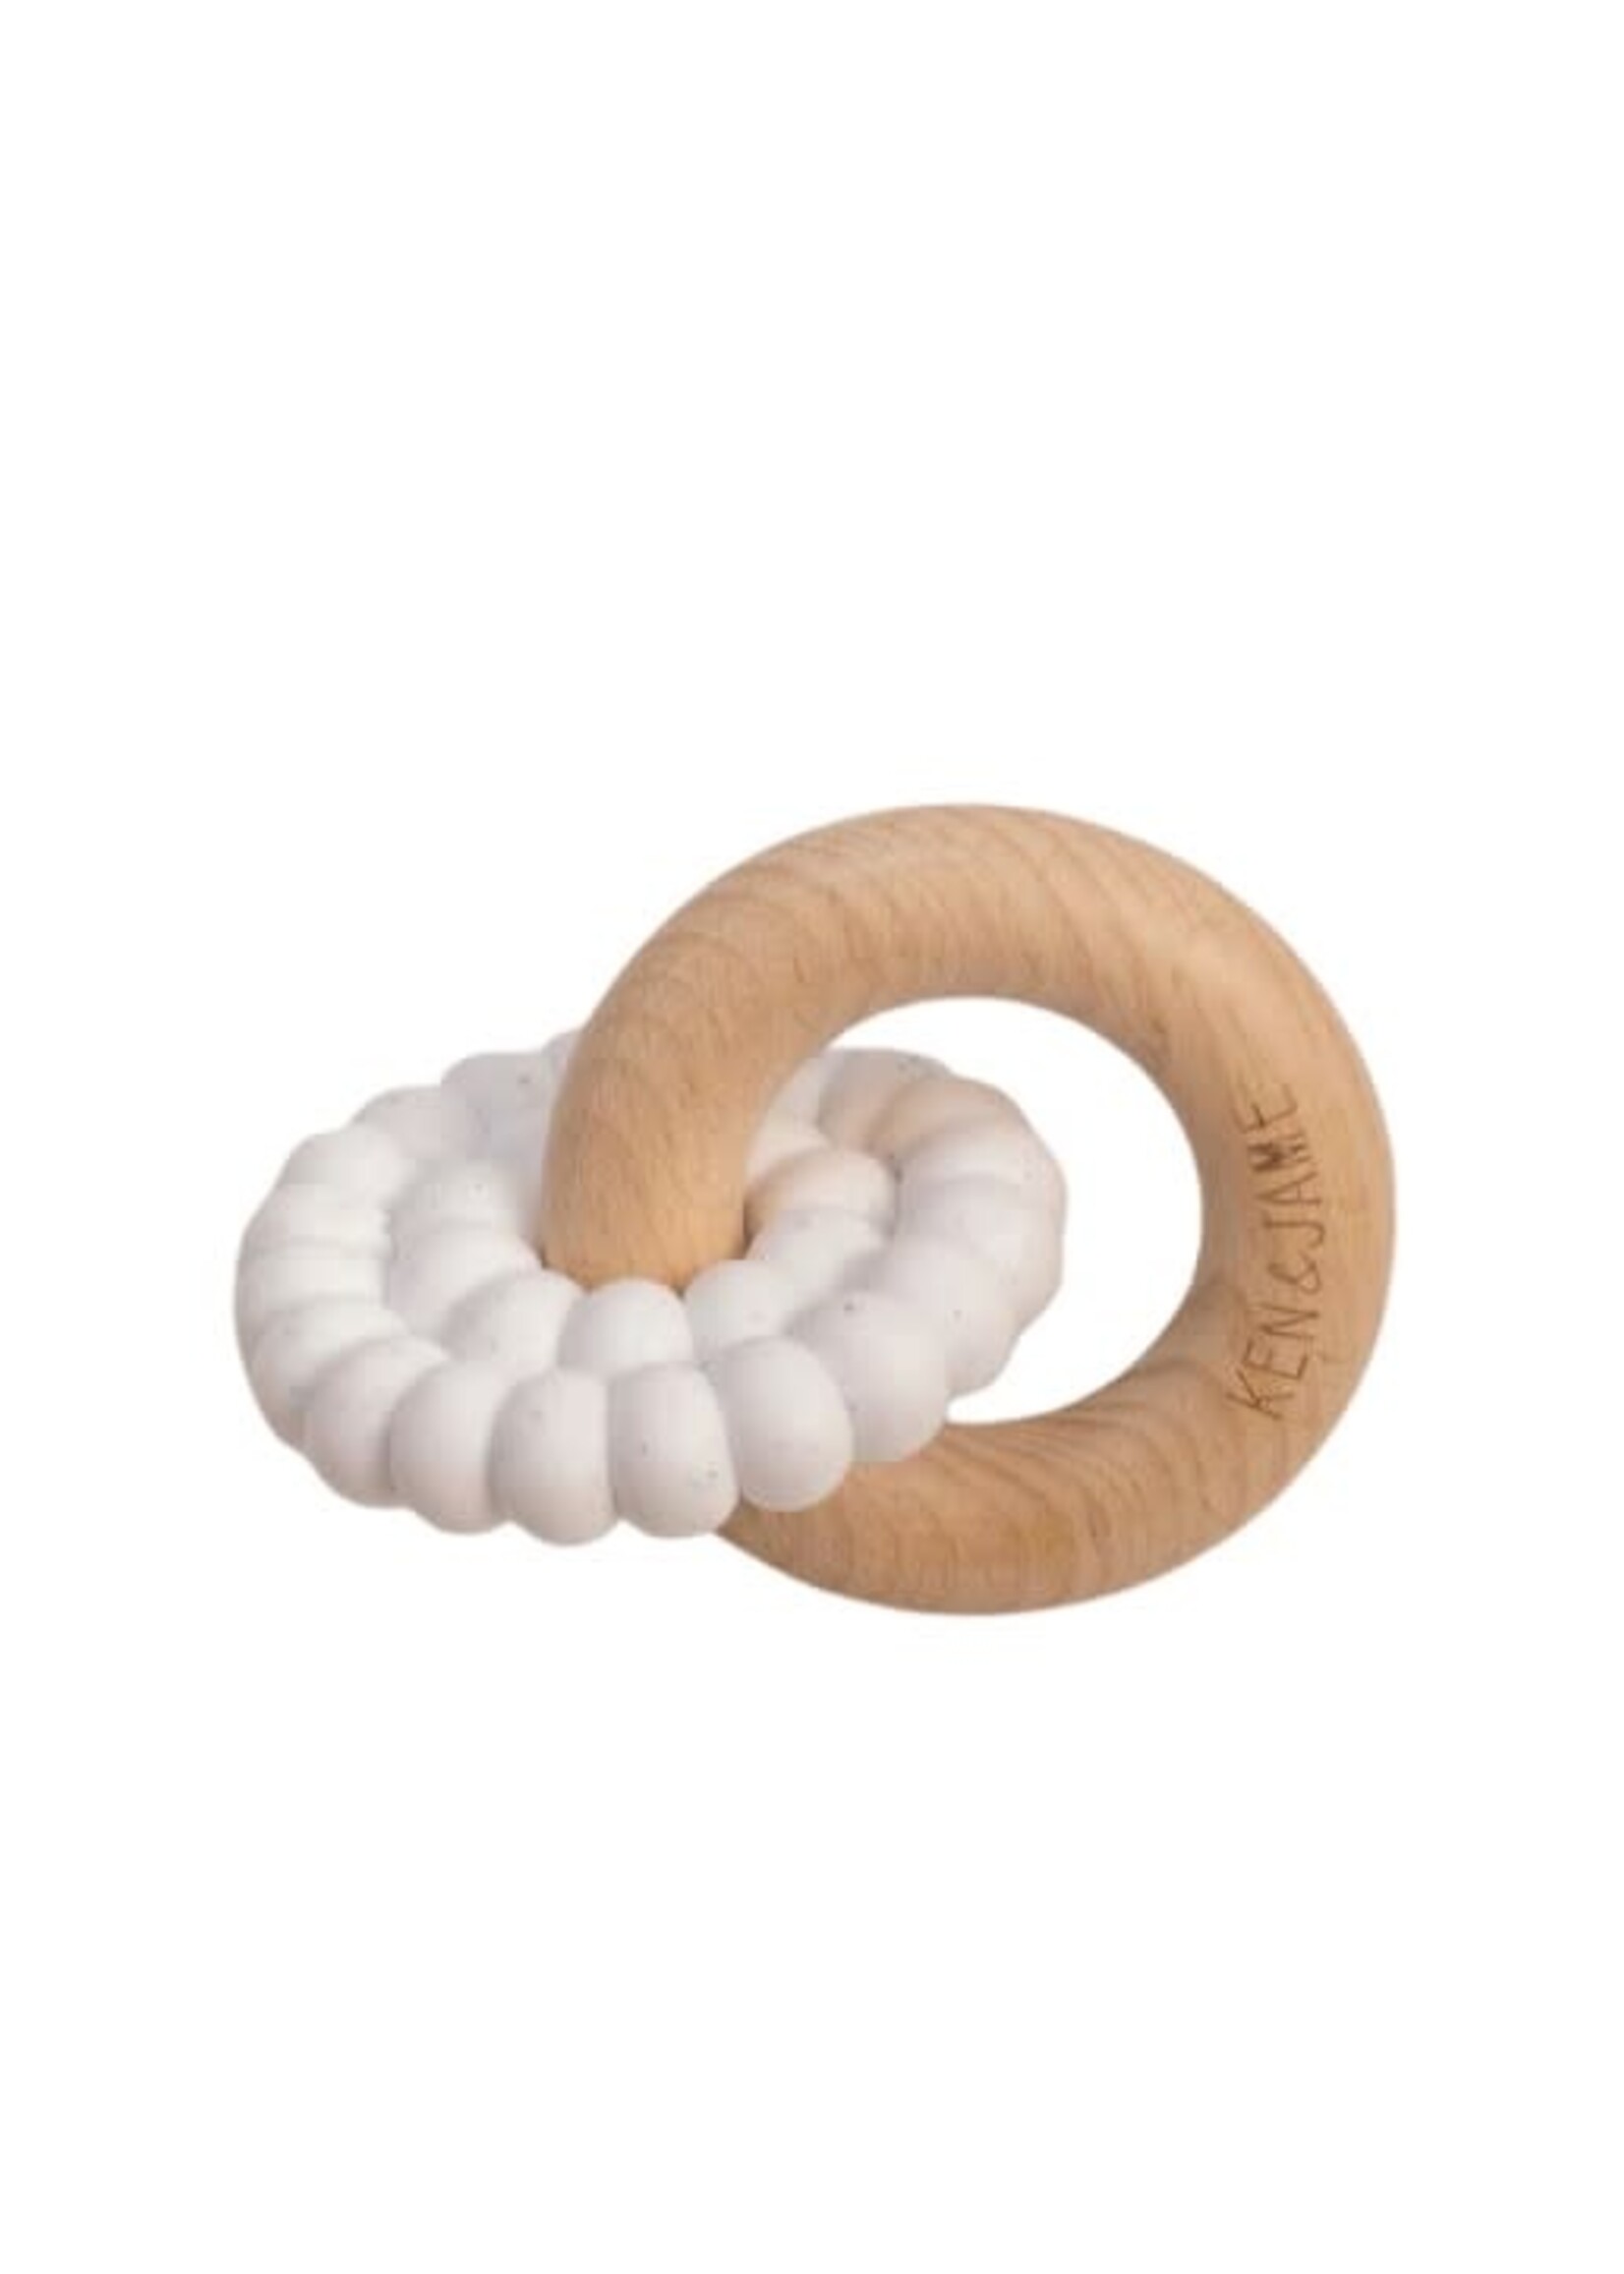 Ken & Jame Teething Ring in Wood and White Silicone